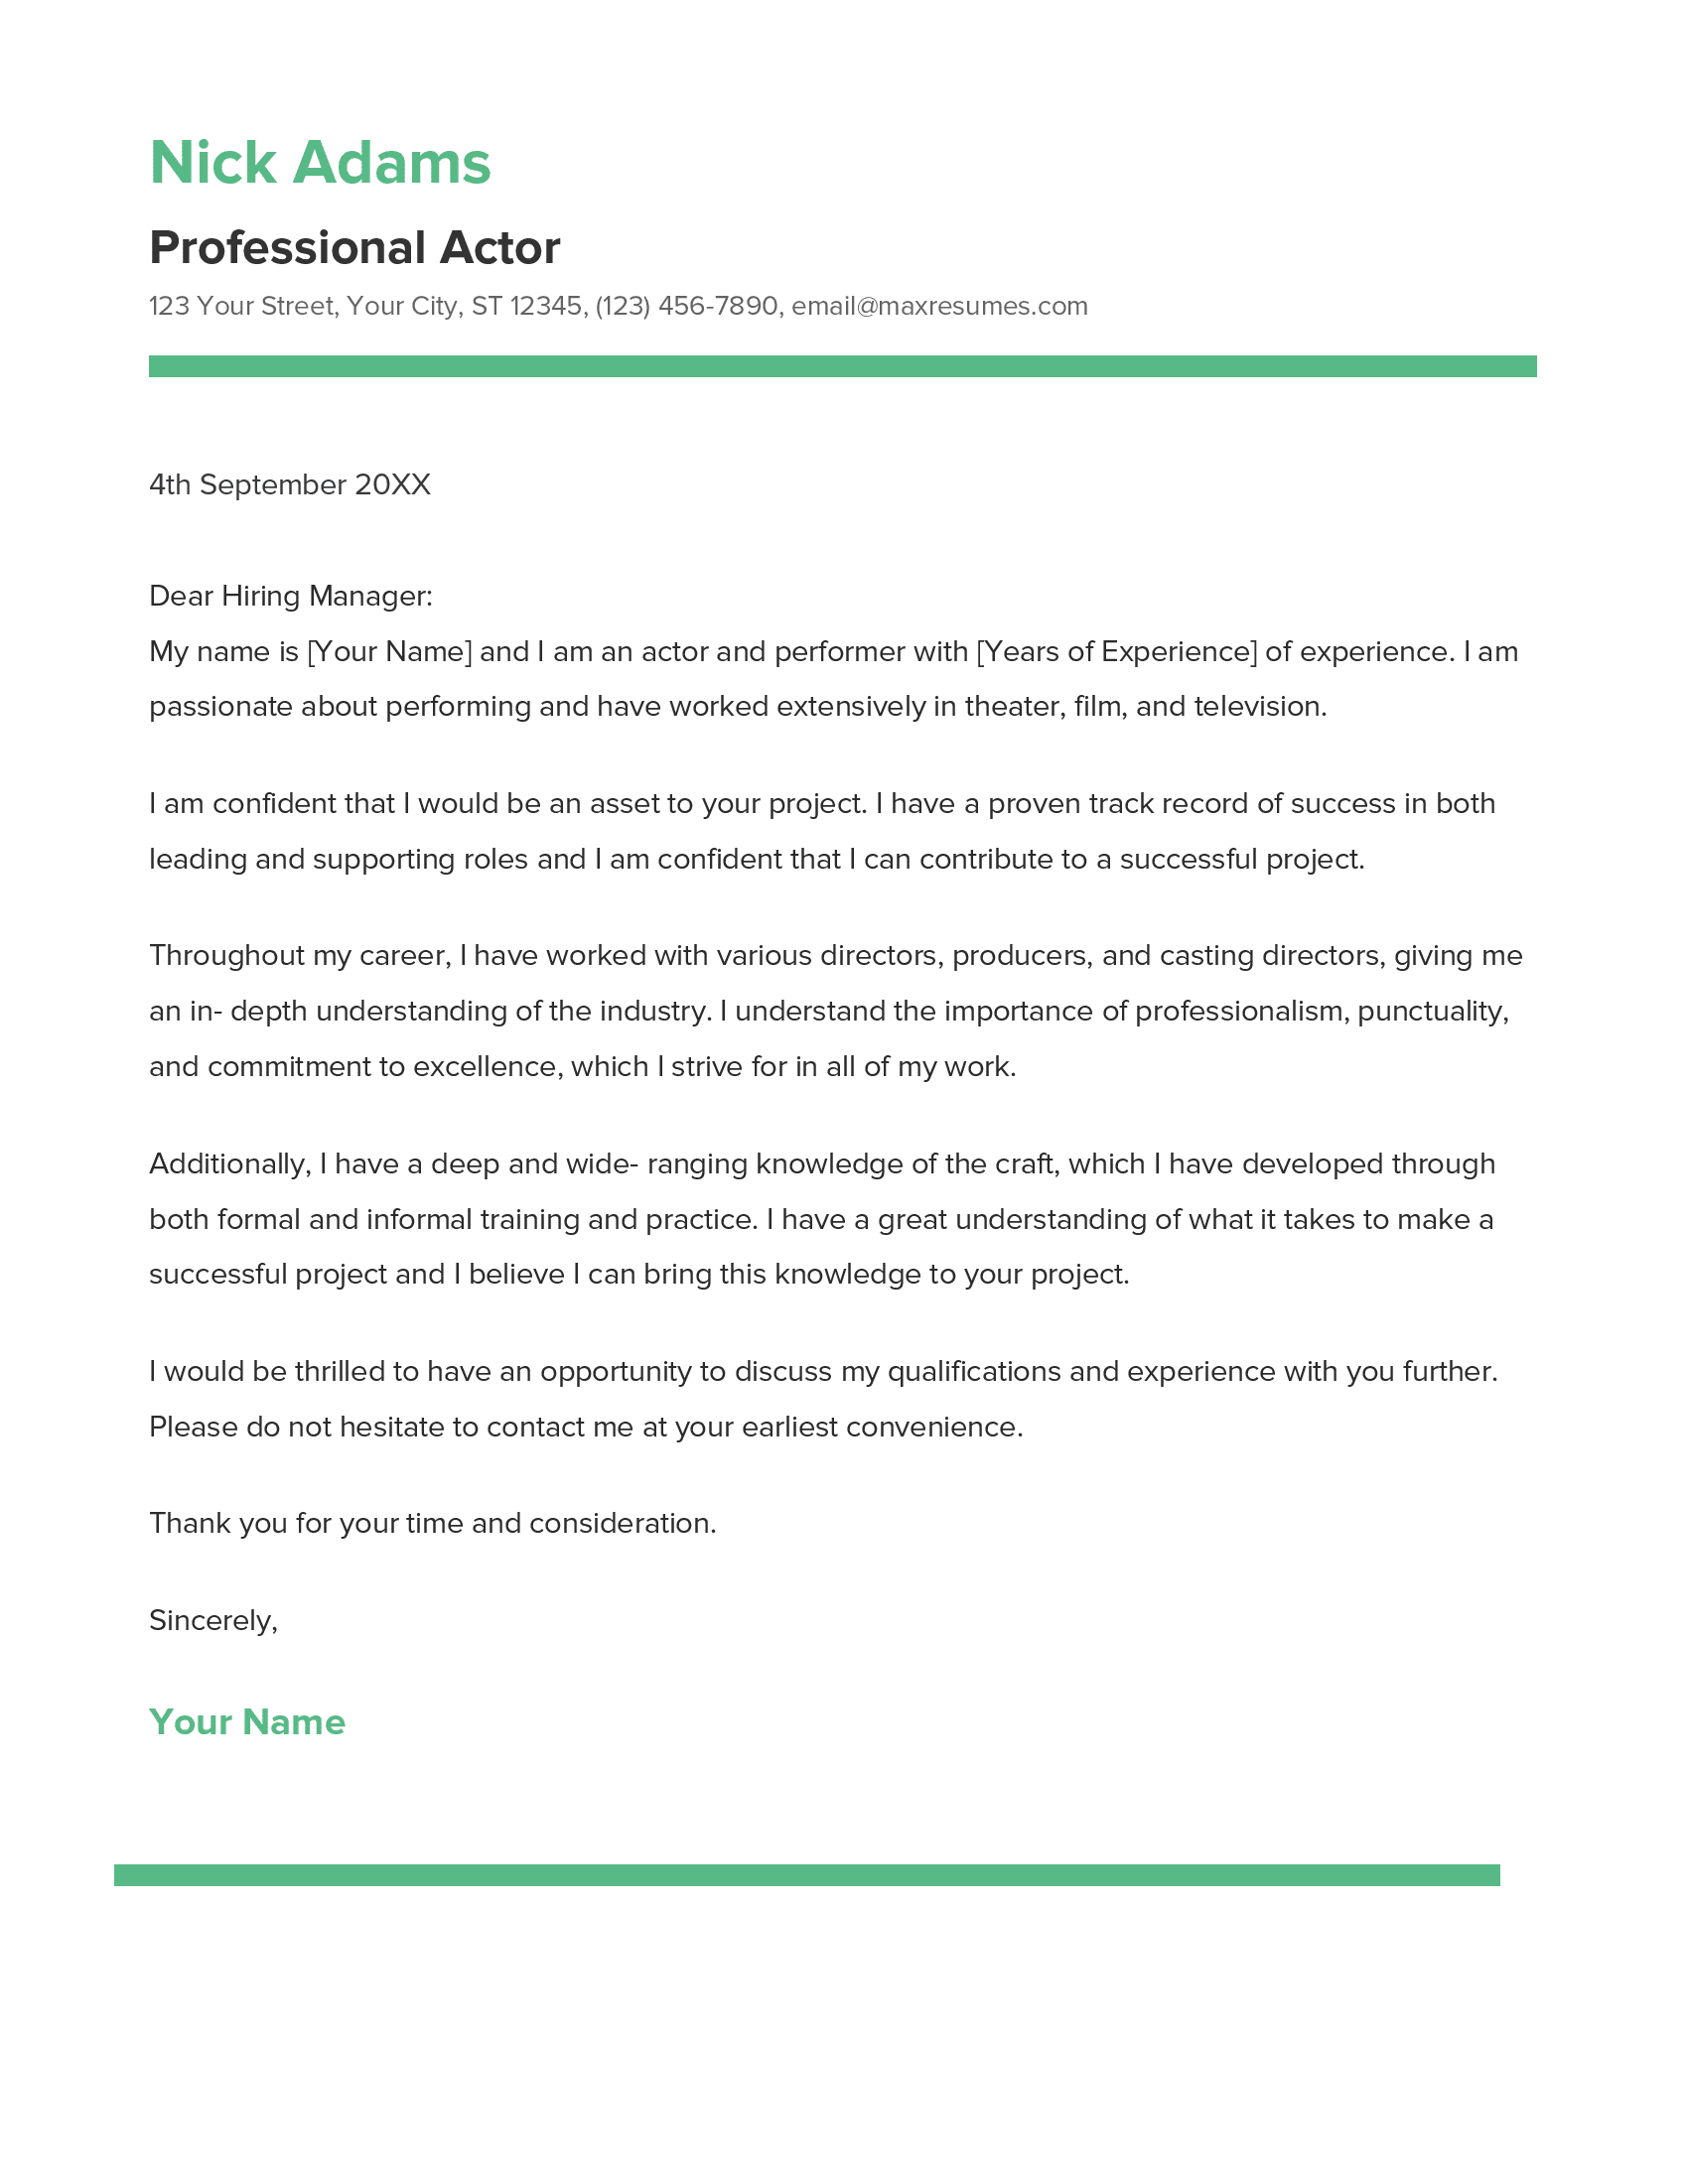 Professional Actor Cover Letter Example